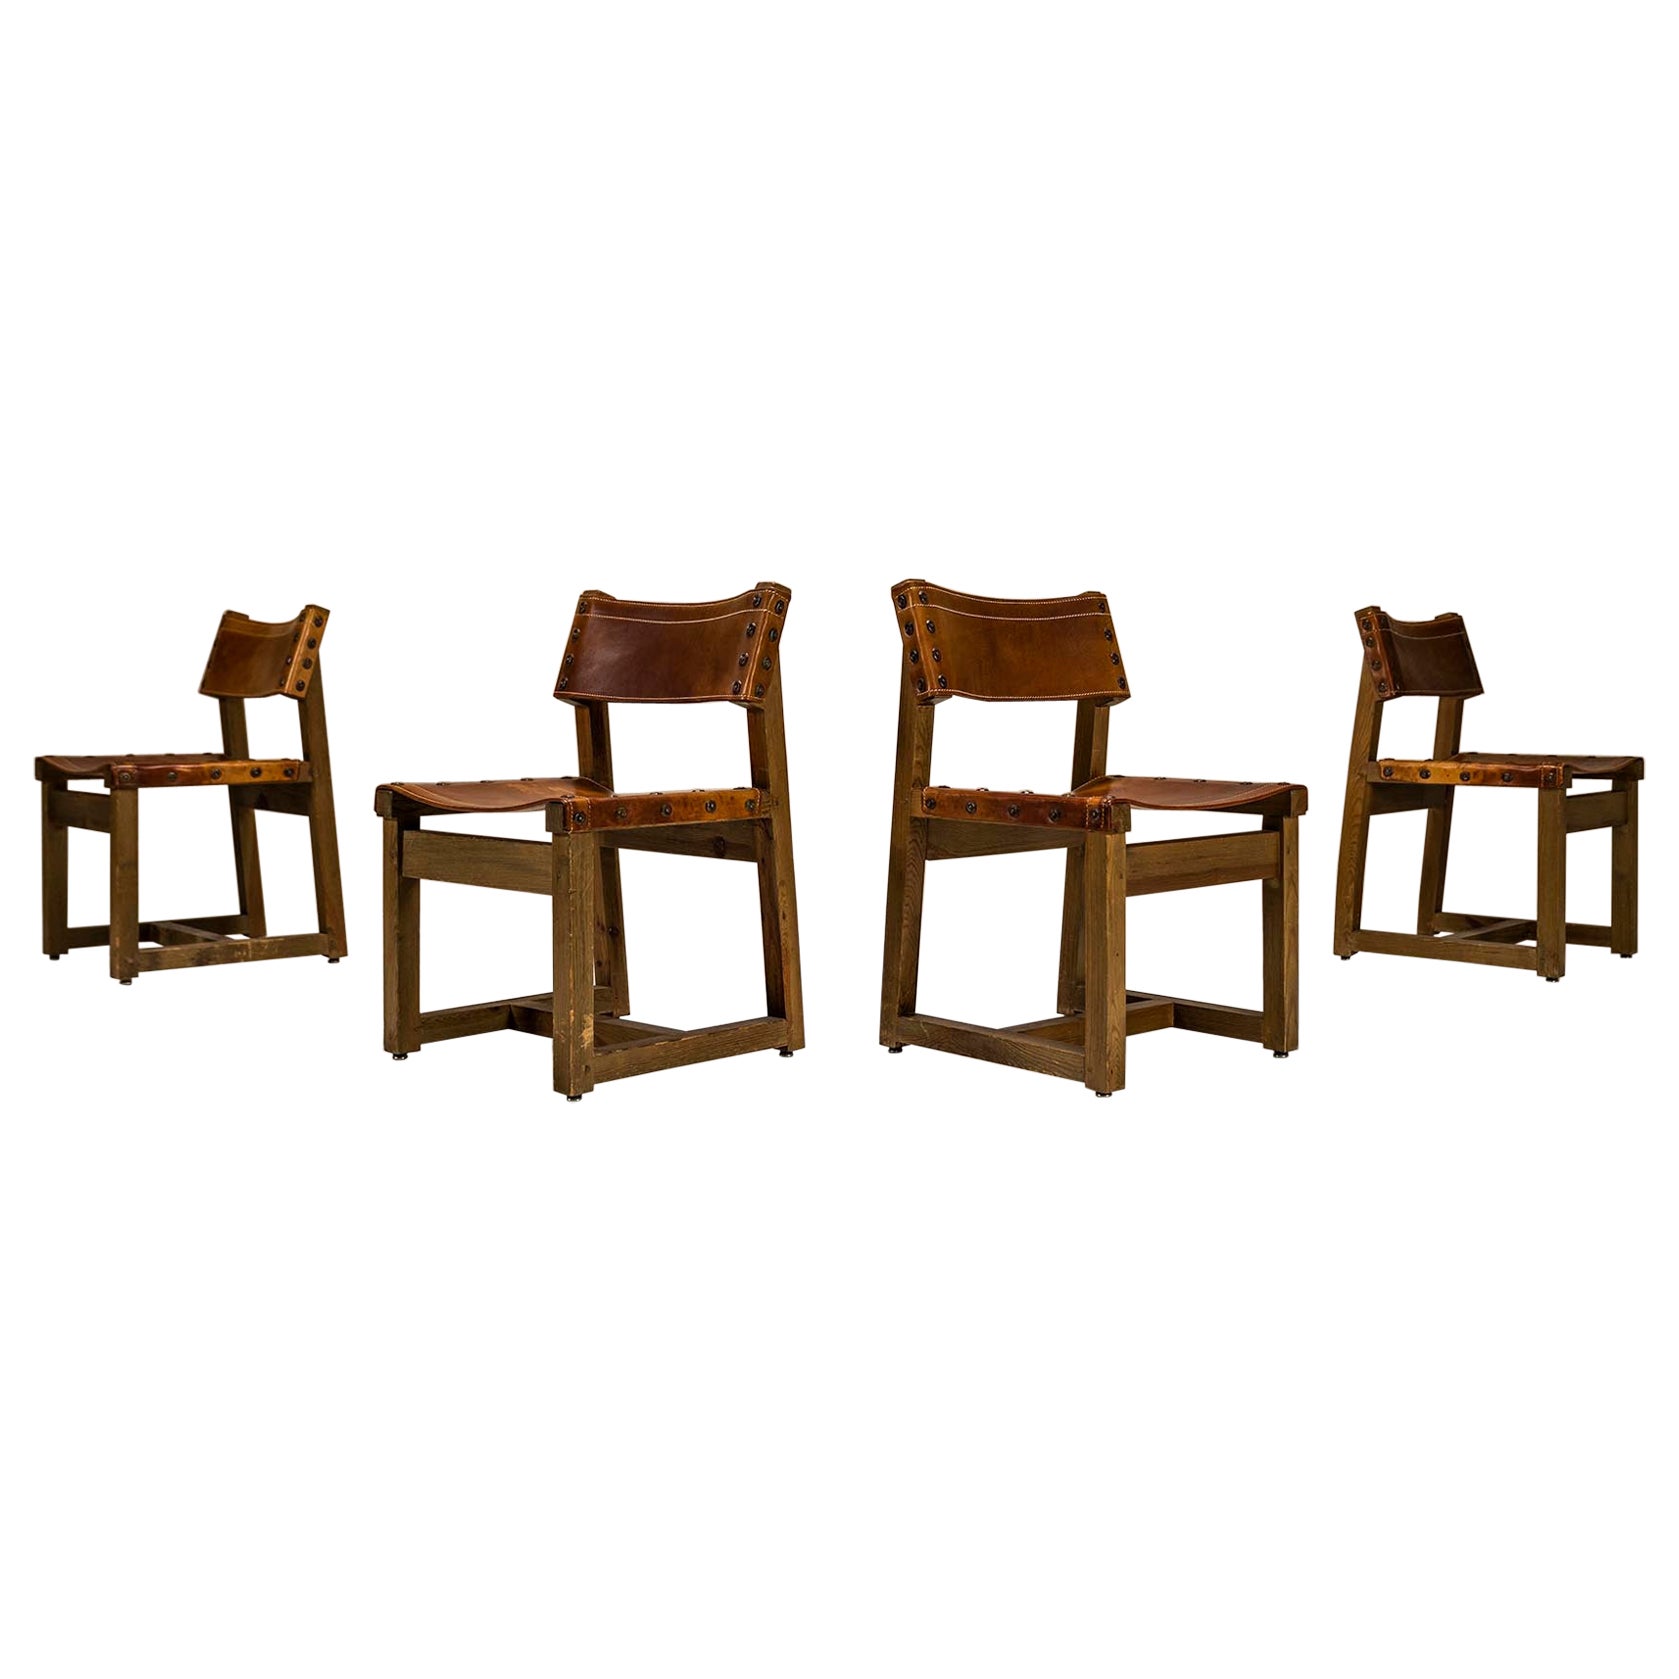 Biosca Set of 4 Chairs in Pine and Cognac Saddle Leather, Spain, 1960s For Sale